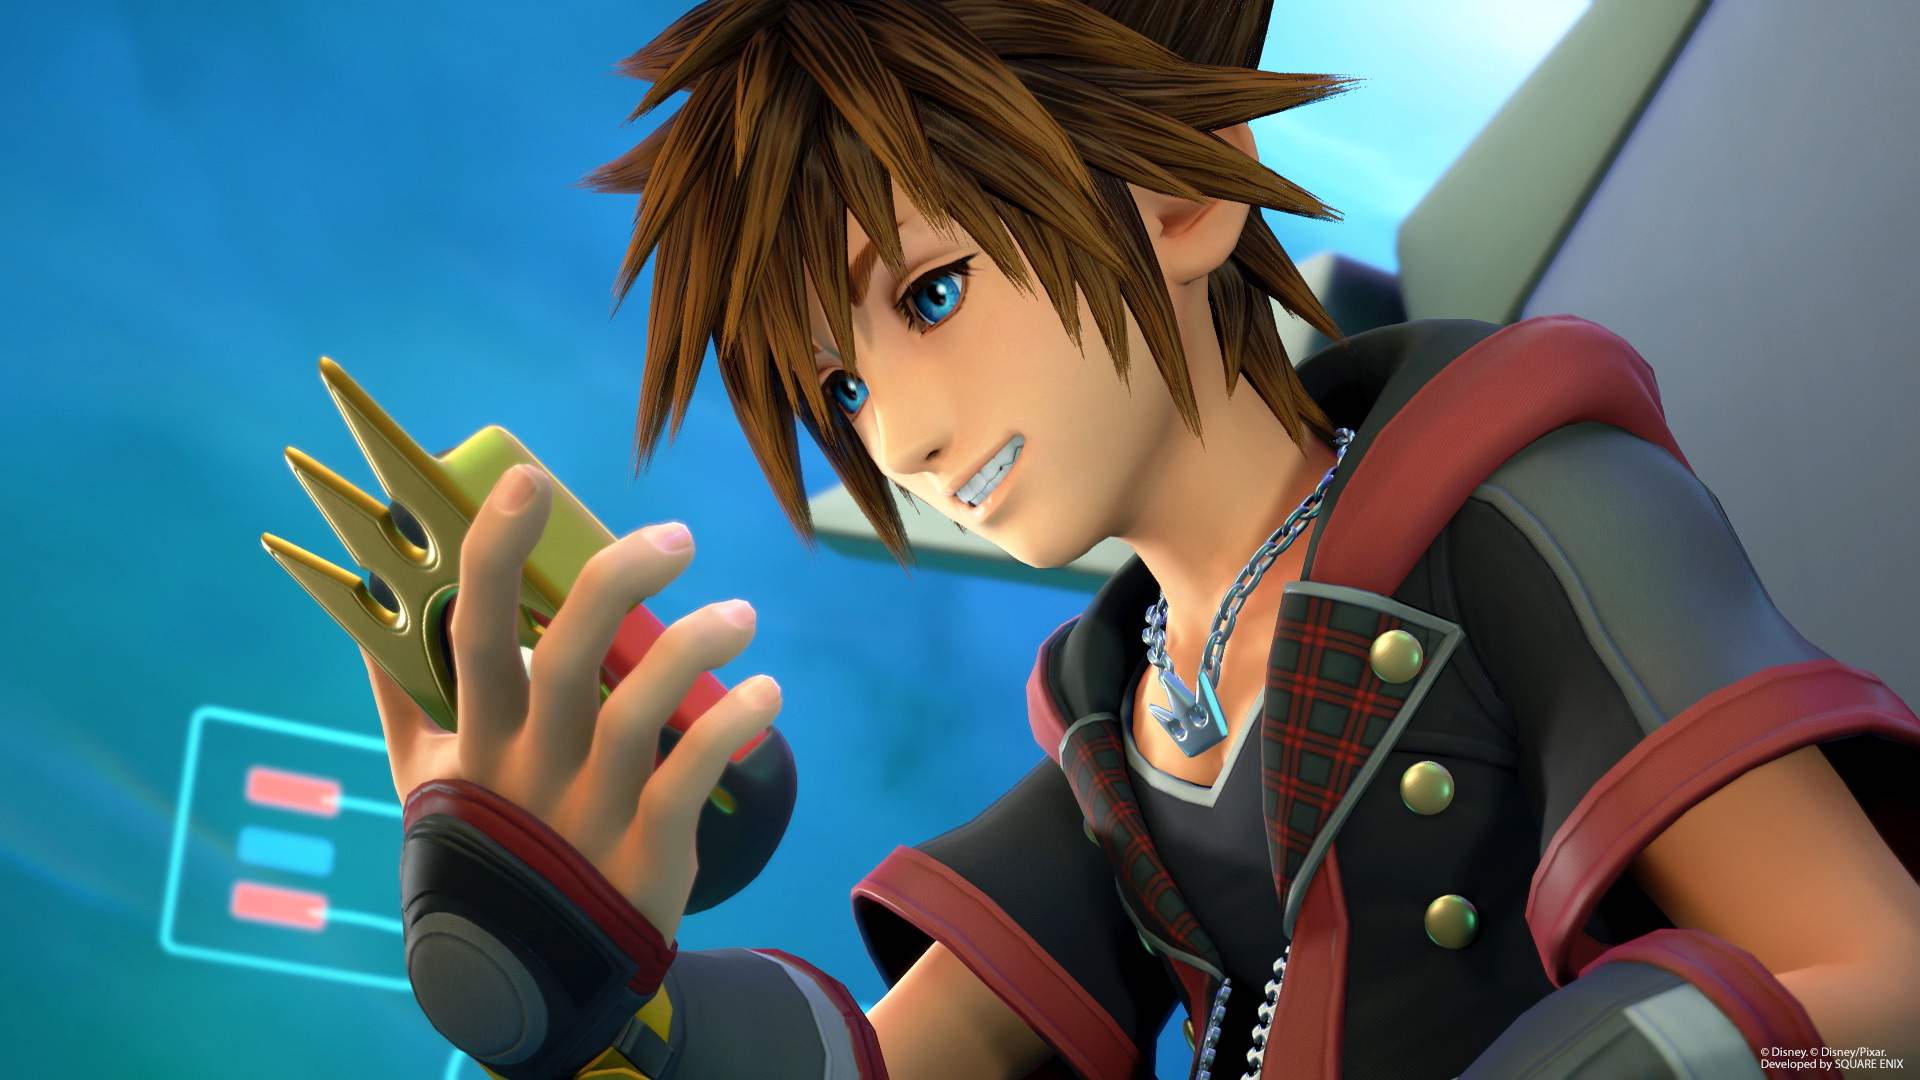 The KINGDOM HEARTS series comes to Switch! | Square Enix Blog